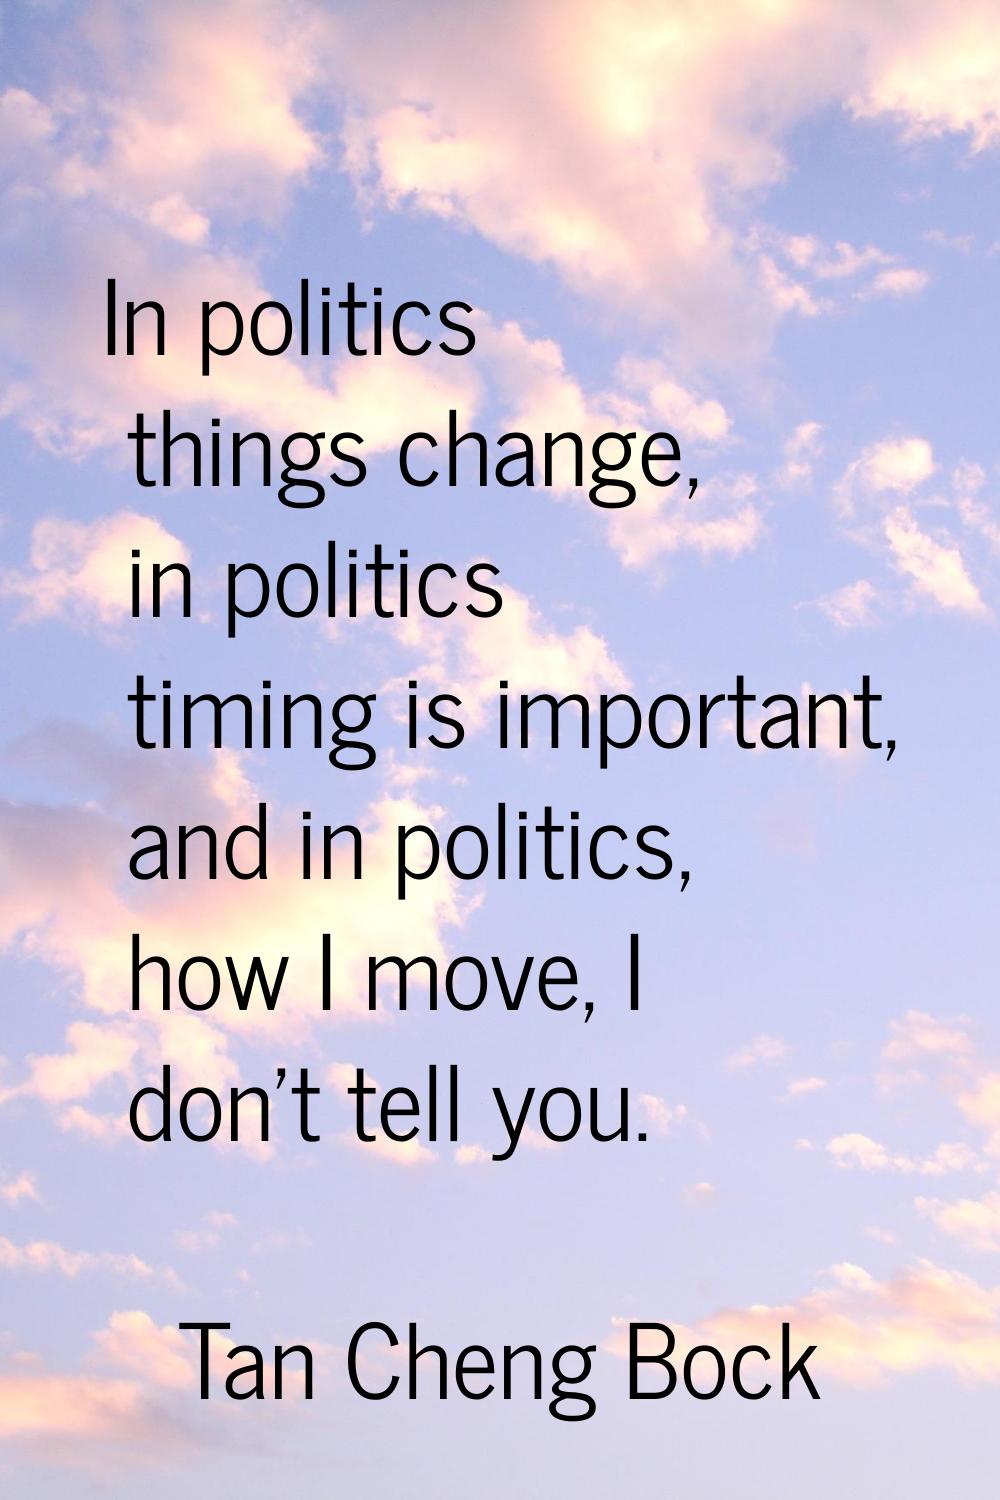 In politics things change, in politics timing is important, and in politics, how I move, I don't te